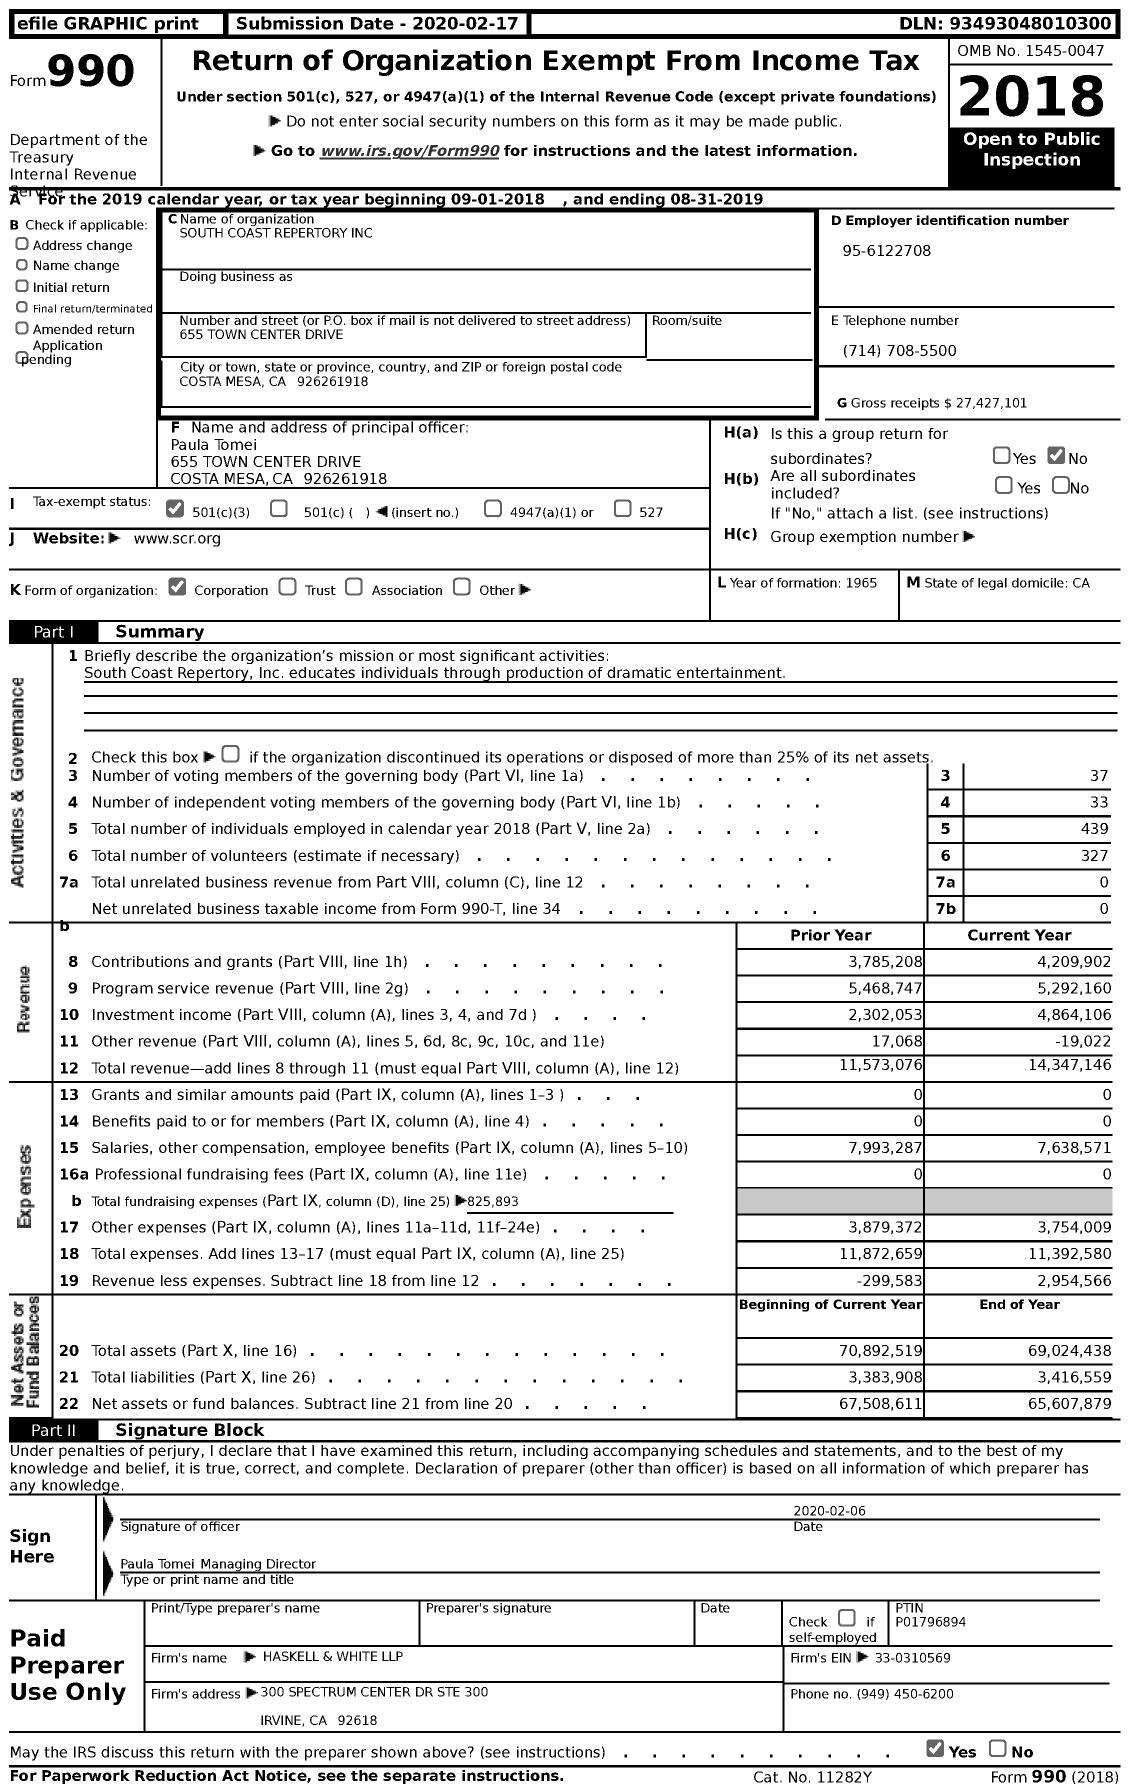 Image of first page of 2018 Form 990 for South Coast Repertory (SCR)